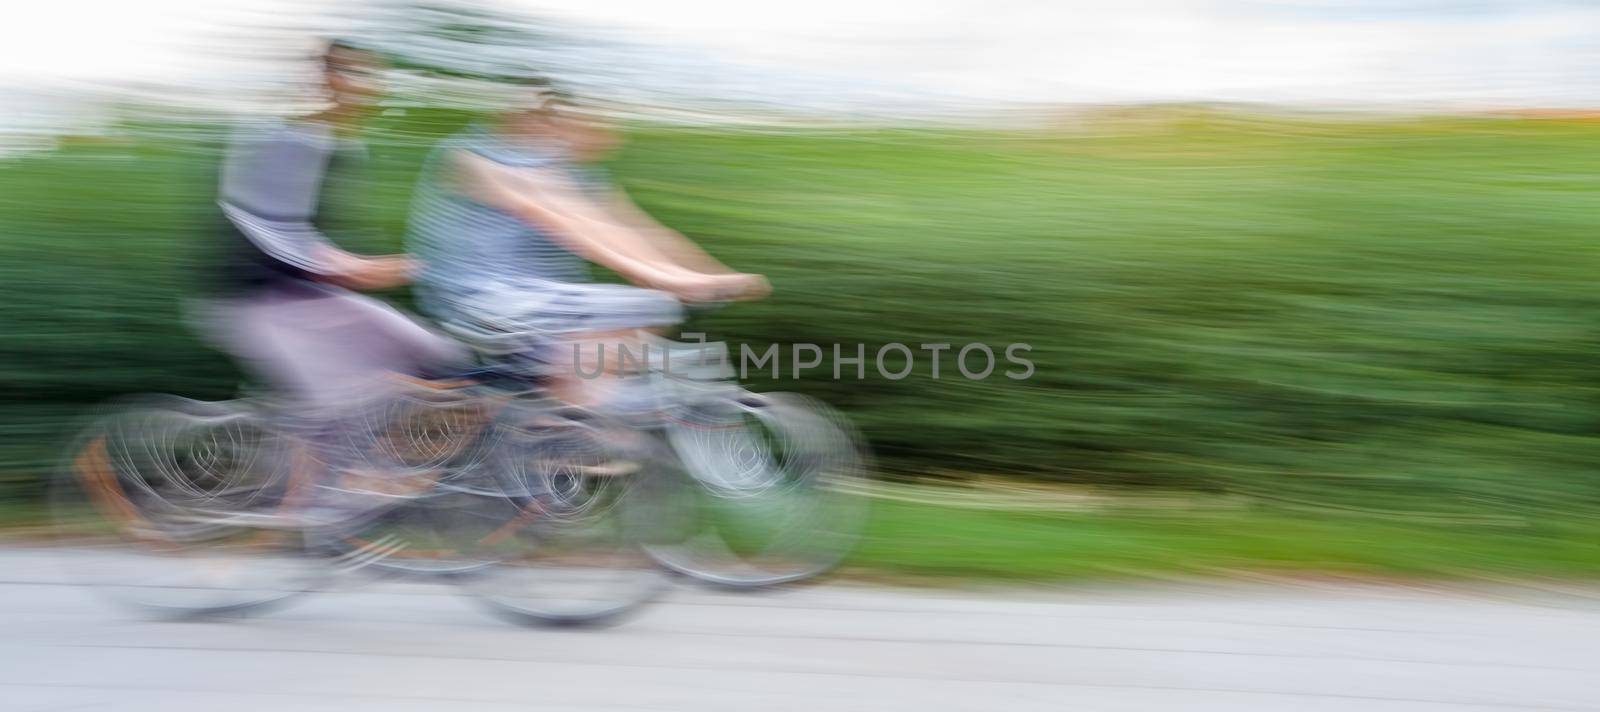 Two teenagers cyclists by palinchak